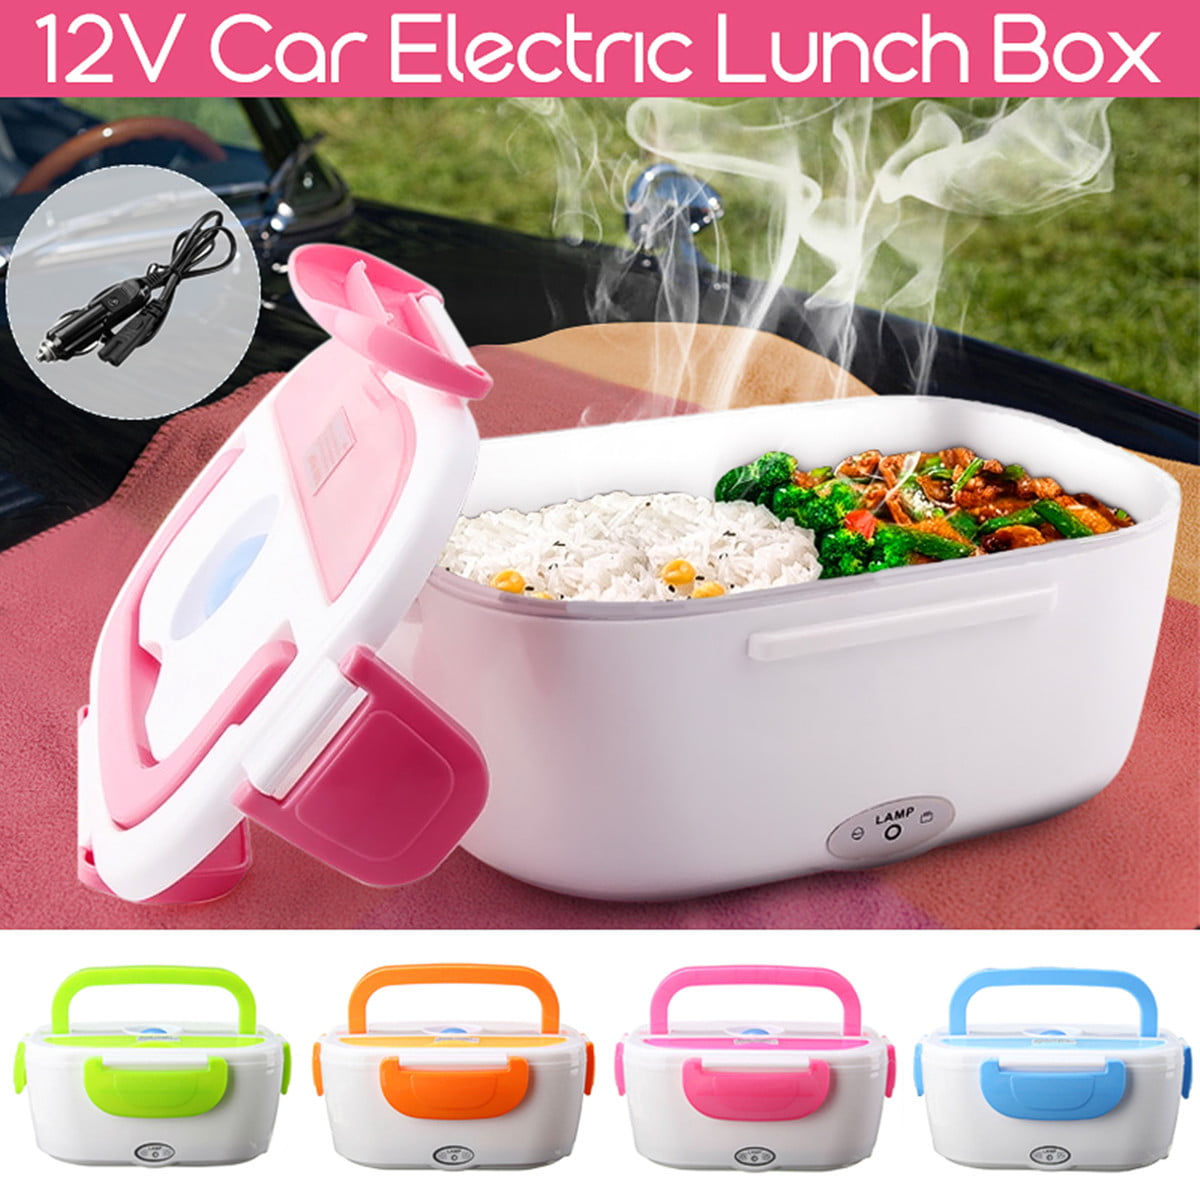 Portable 1.5L Blue Lunch Box 12V Car Electric Food Warmer Hot Rice Cooker Heater